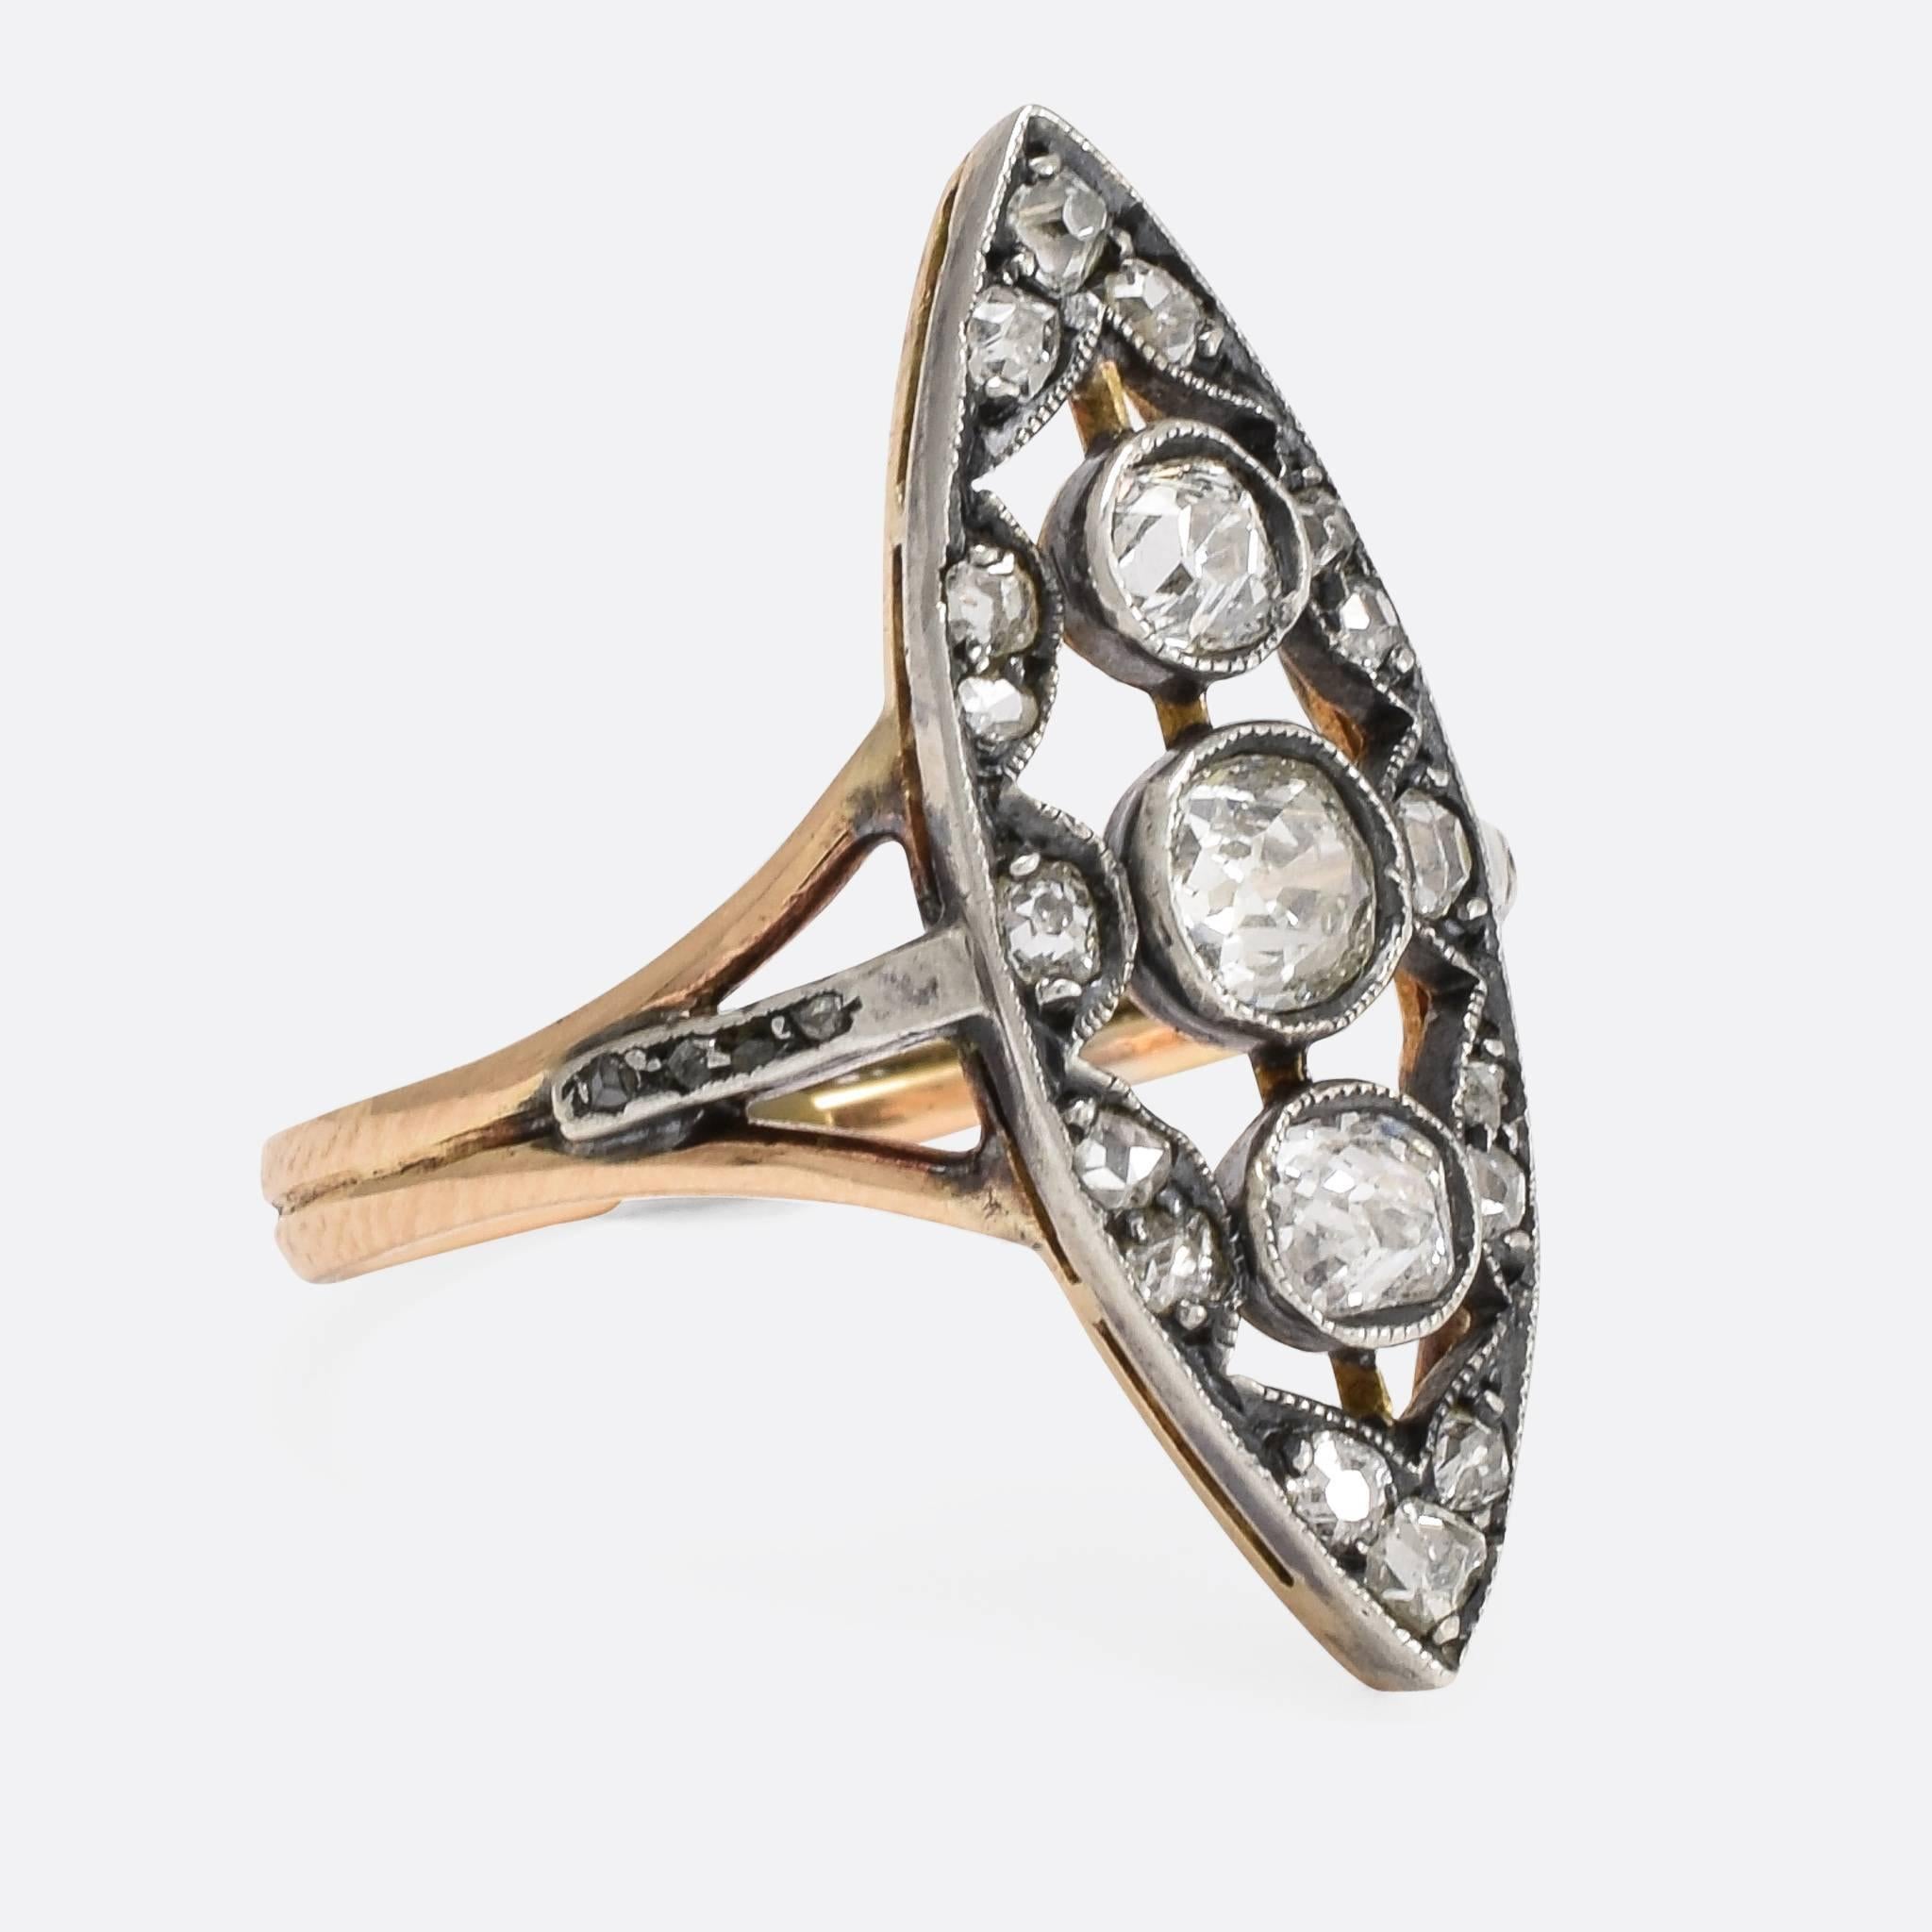 This superb antique Russian ring is set with .92ctw of old and rose cut diamonds, on a marquise shaped head. The stones are set in silver, with fine millegrain detail, and the trifurcated shoulders are accented with further diamonds. The reeded band